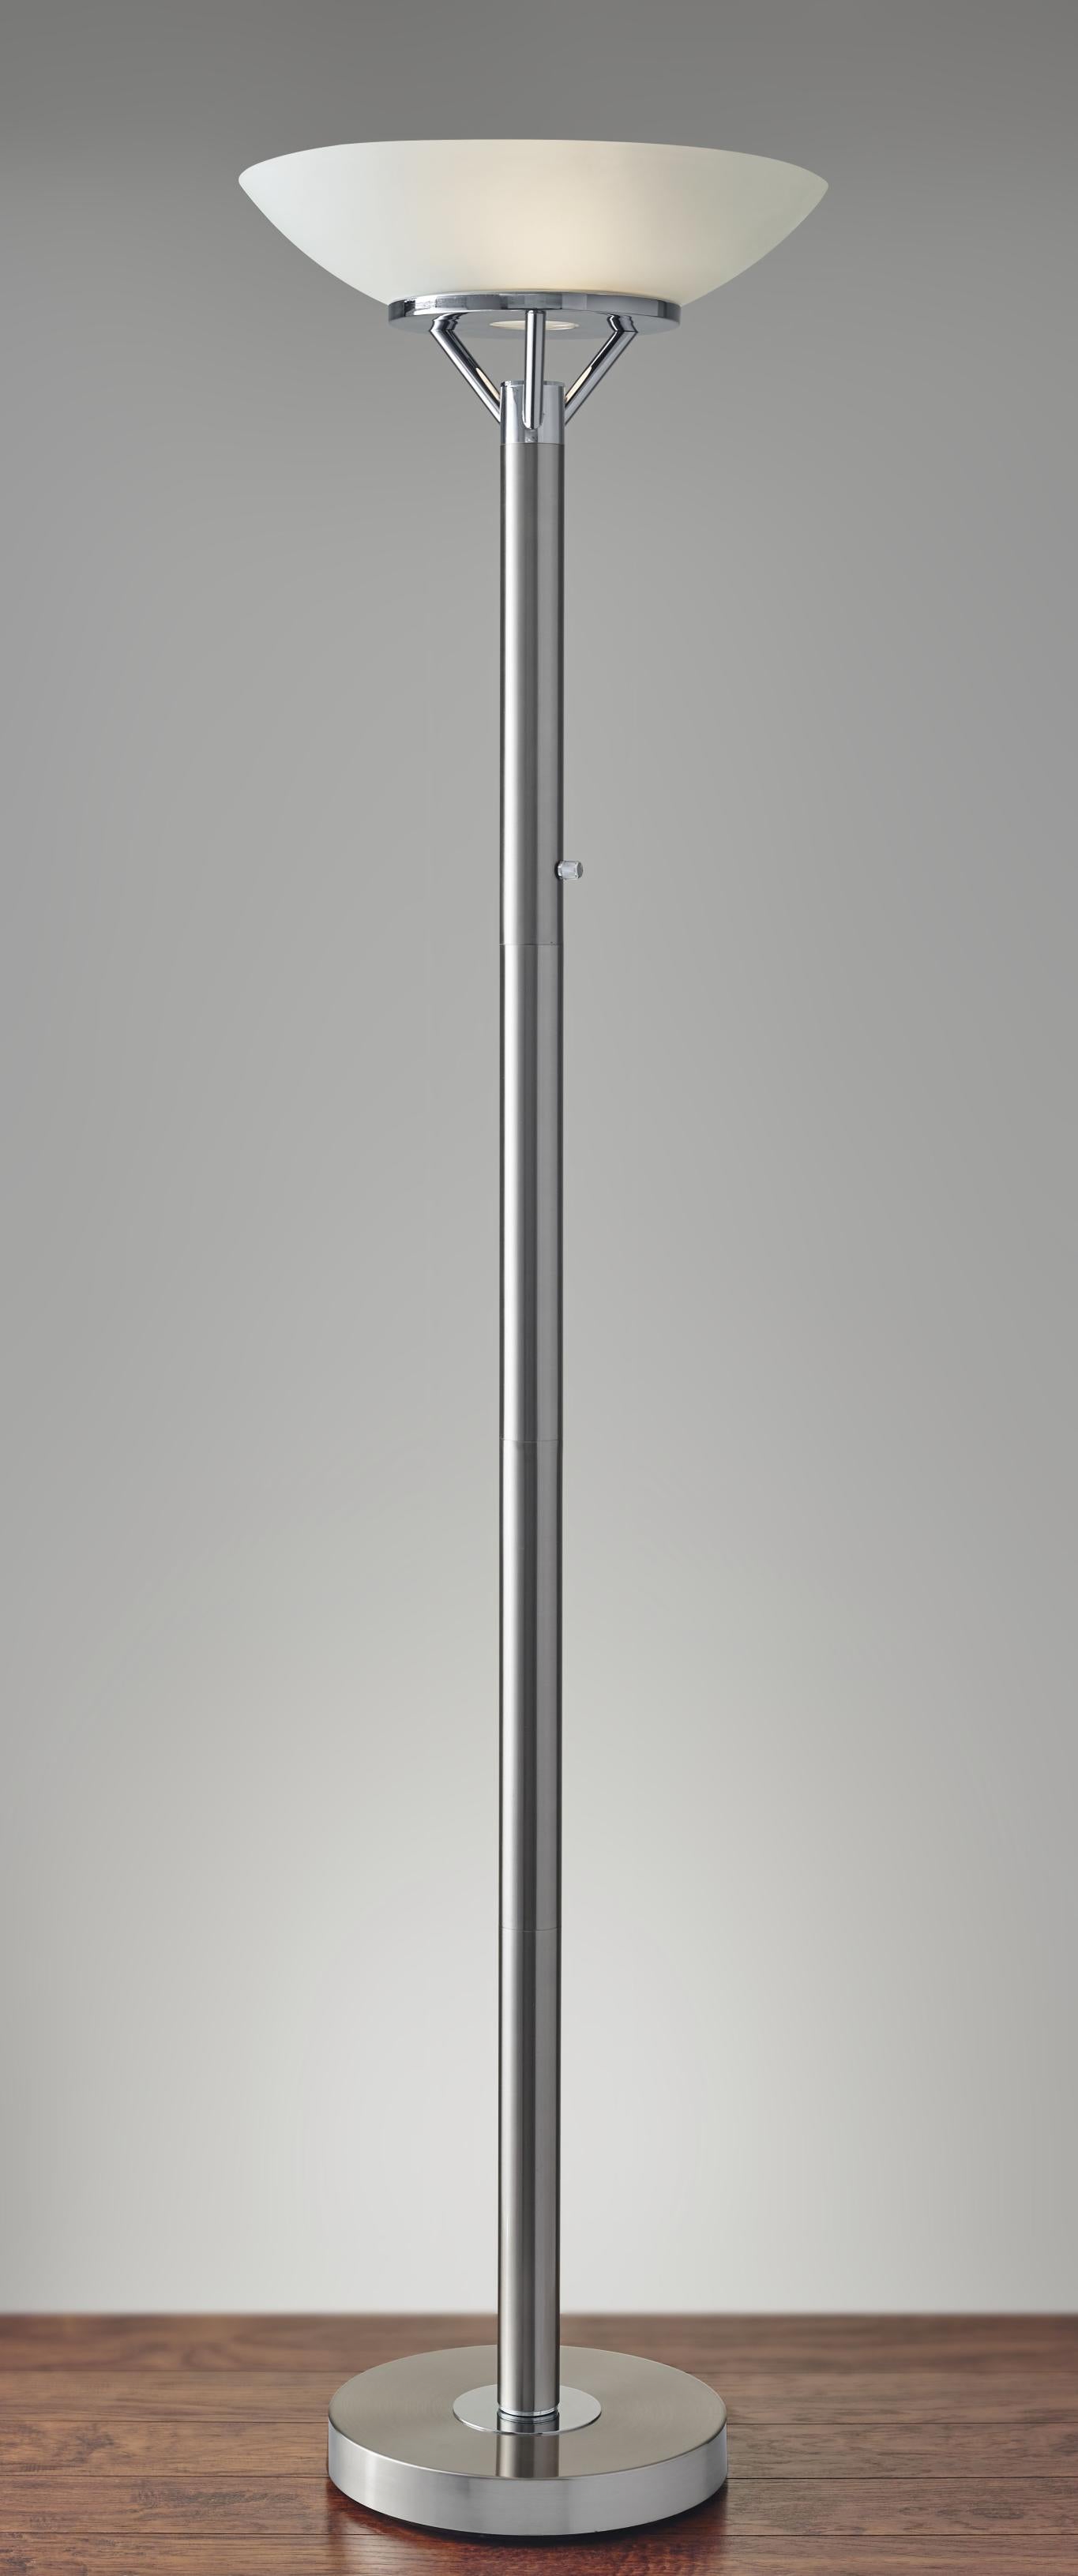 18" X 18" X 71.5" Brushed steel Metal 300W Torchiere